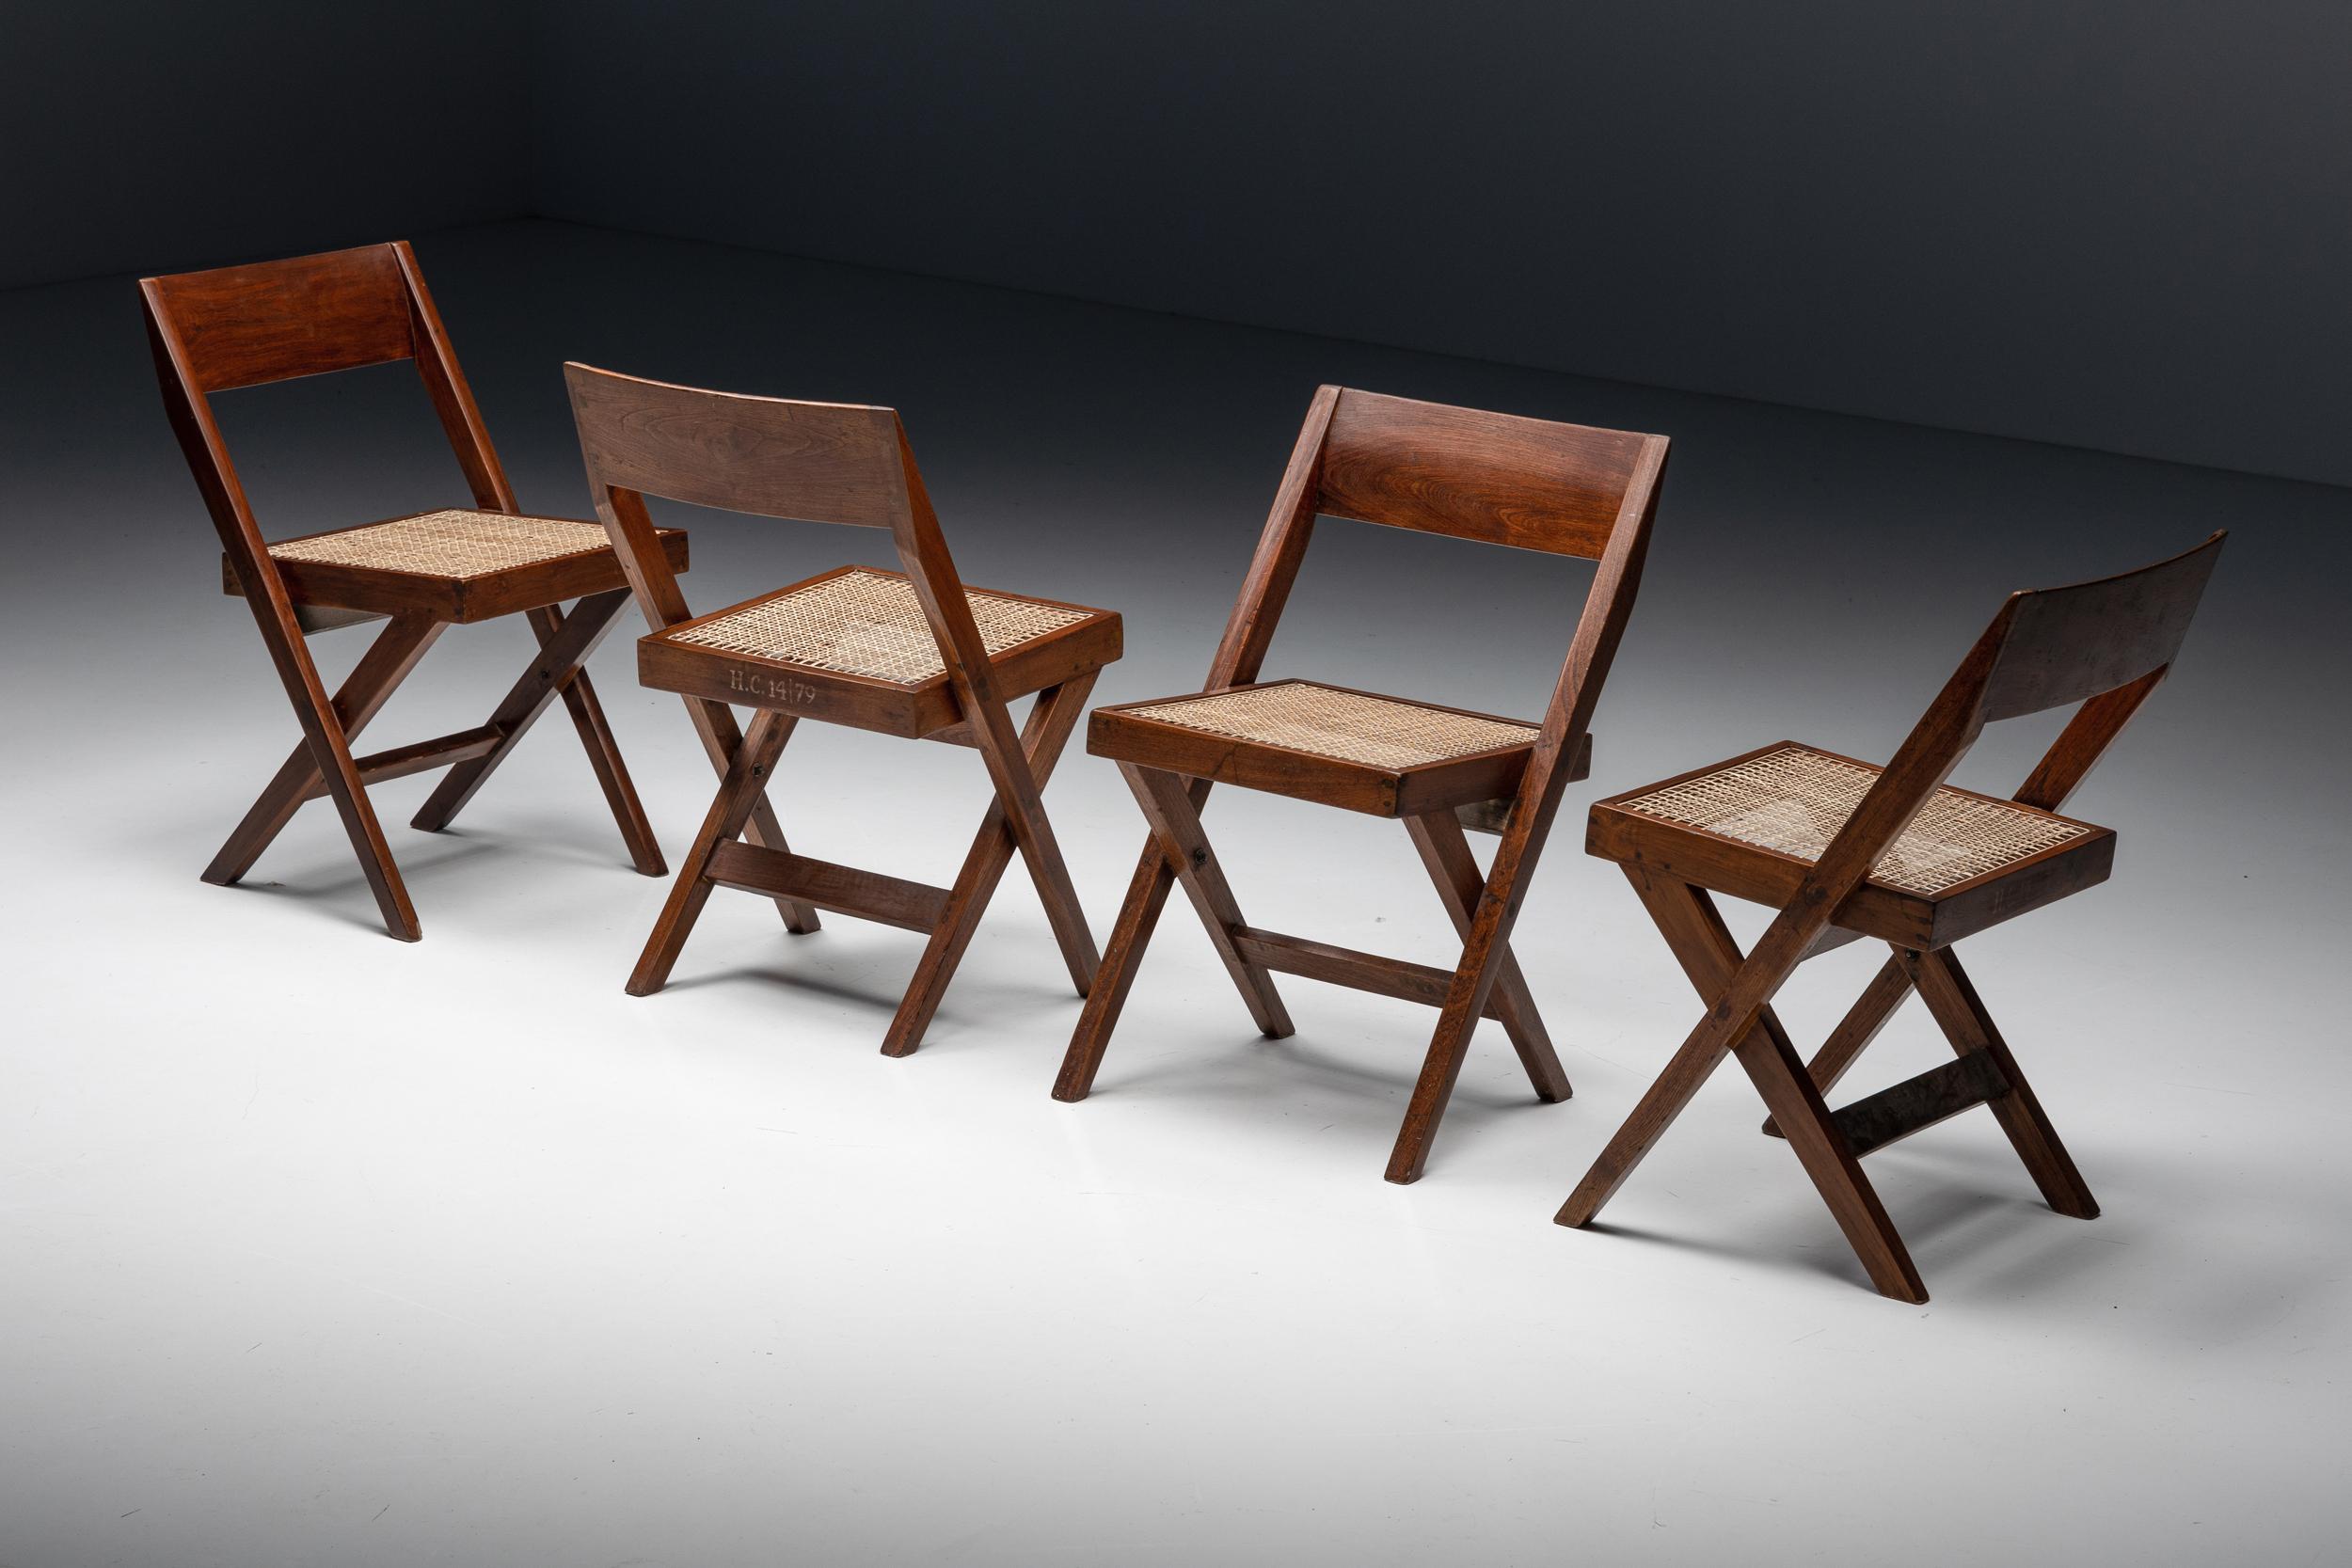 Pierre Jeanneret, library chair, set of four, India, 1952-1965

Measures: H.C 14 / 33, 43, 47, 79
Meaning chairs nr 33, 43, 47, 79 for Room 14 of the High Court of Chandigarh
It's a rare feat to have the chairs perfectly identifiable.

Another